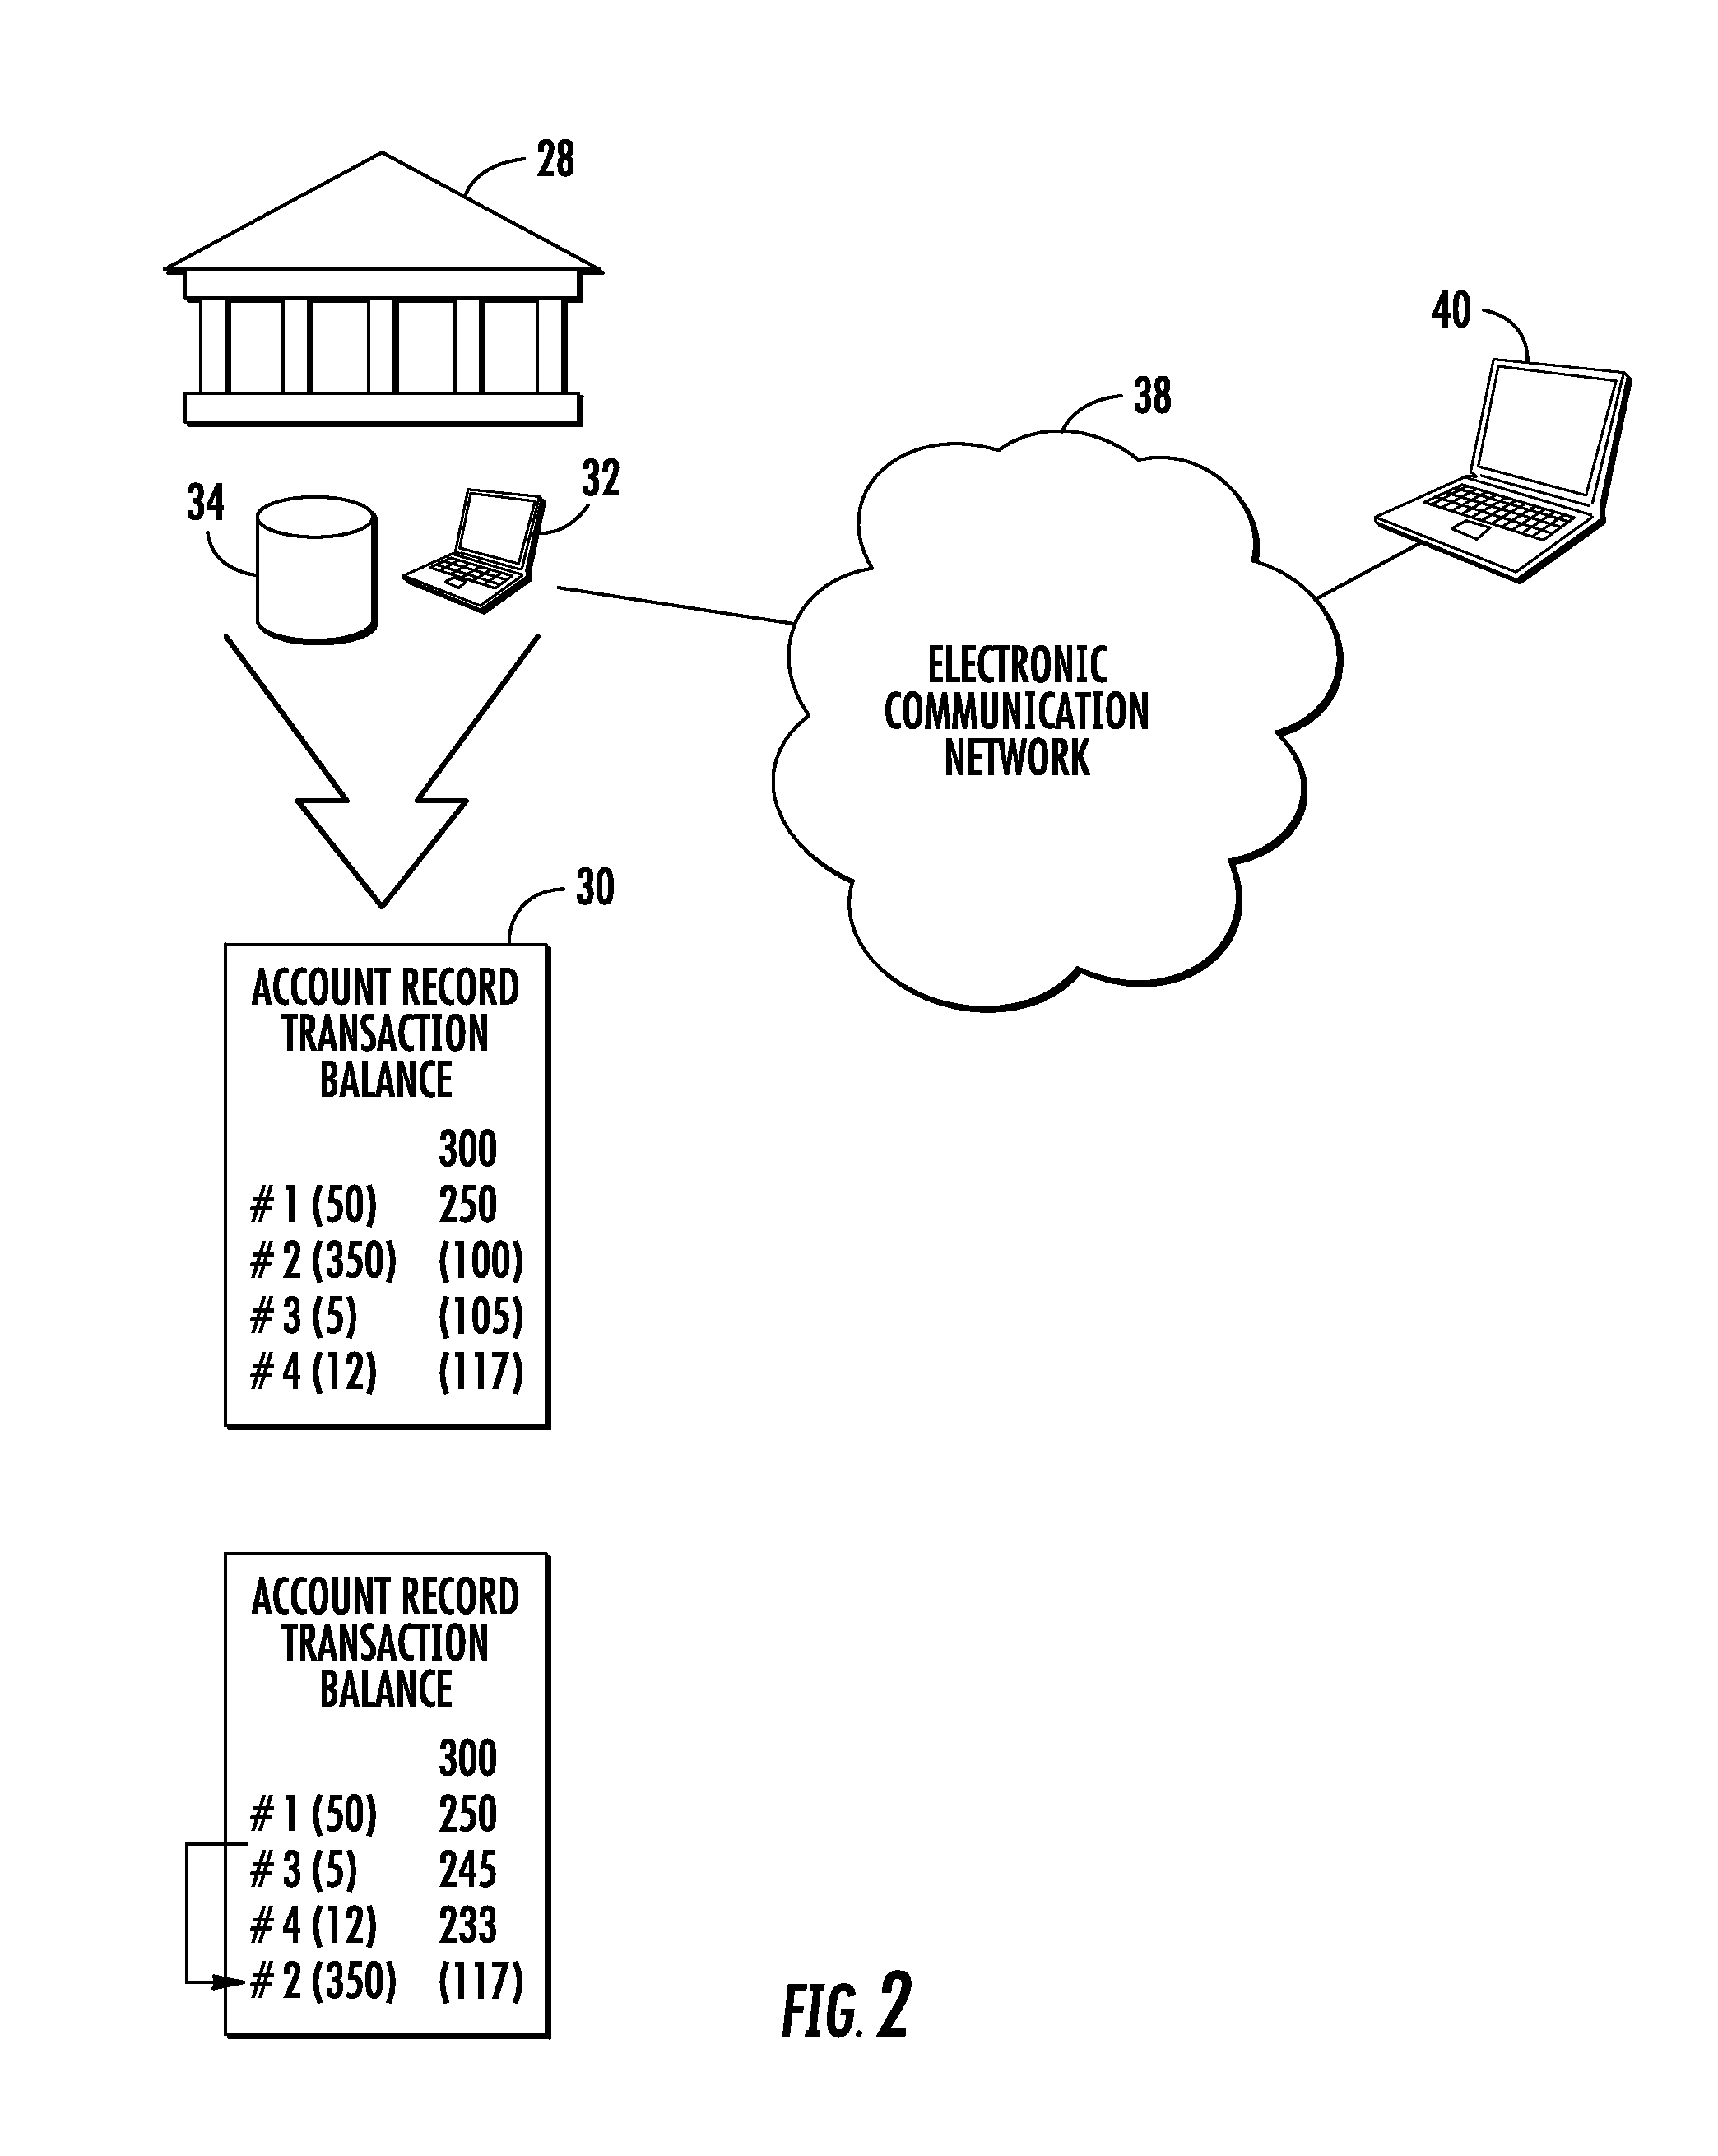 Method and system for allowing a user to control the order in which transactions are posted